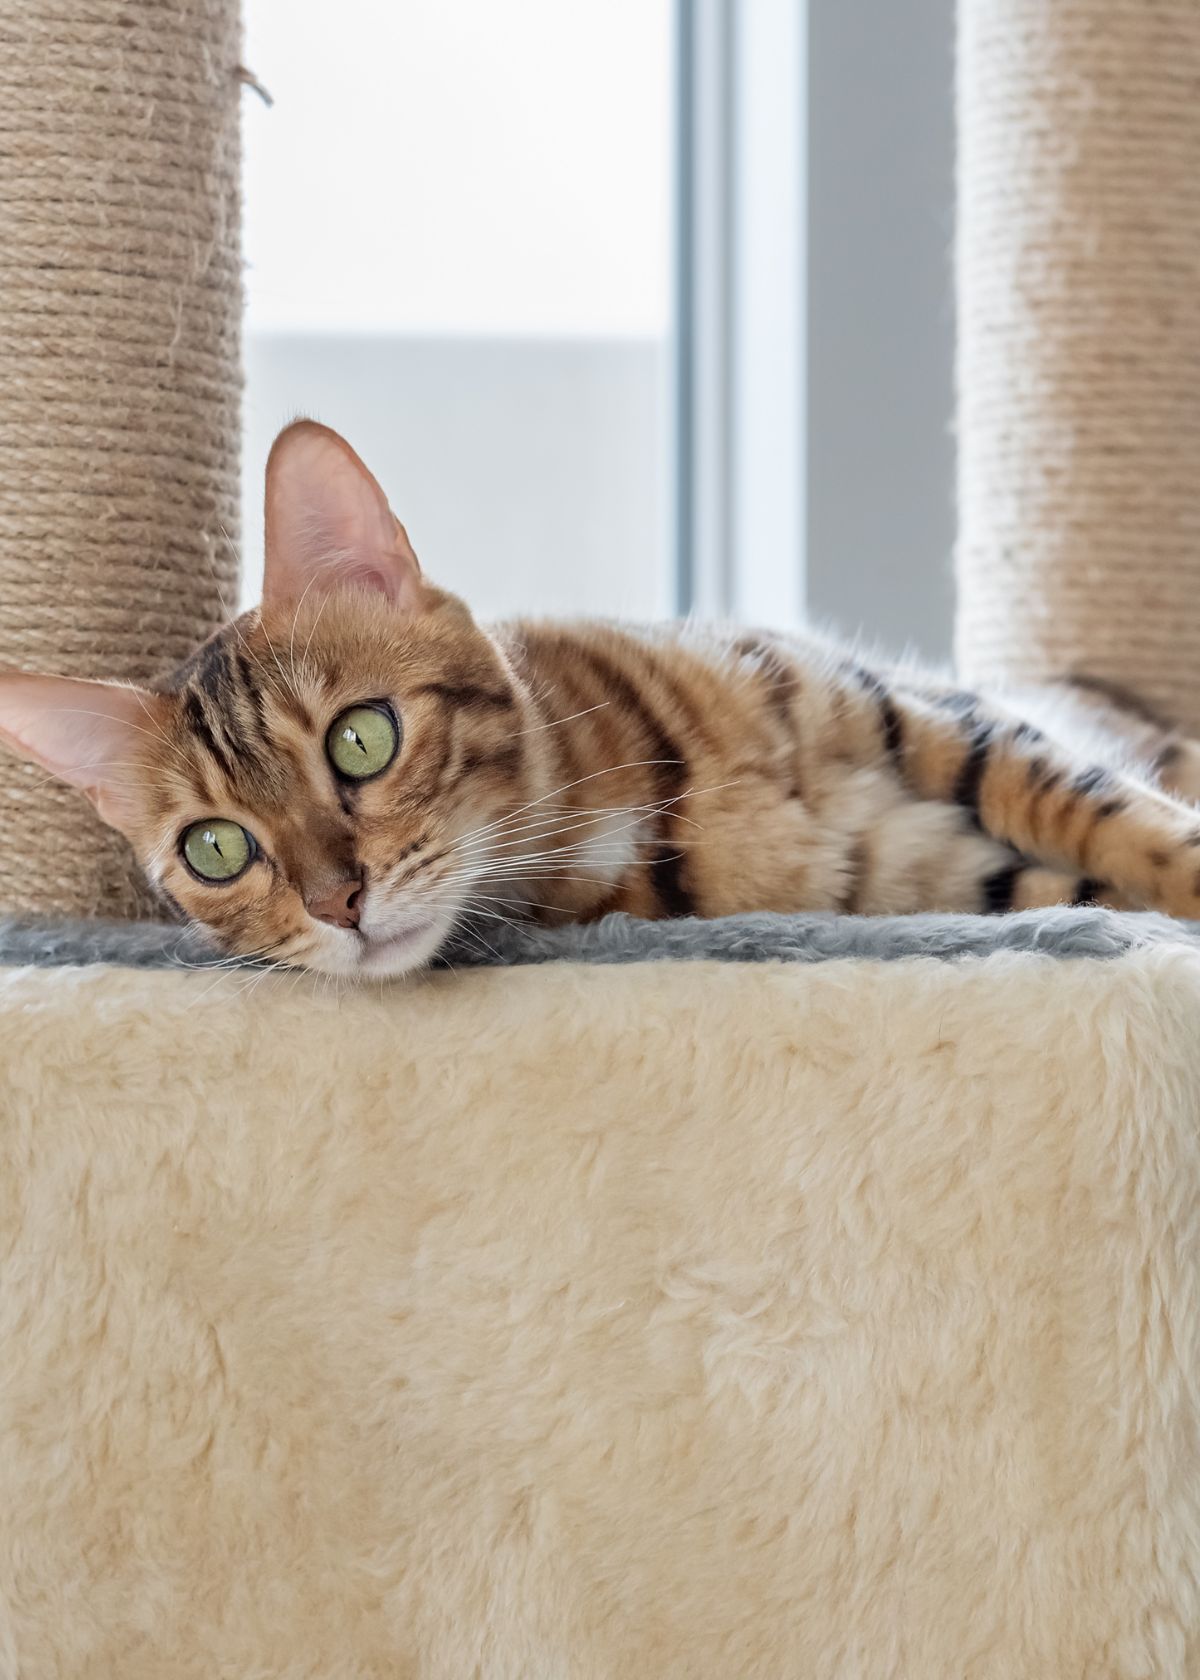 Protect Your Furniture with a Cat Bed Scratcher from Amazon!